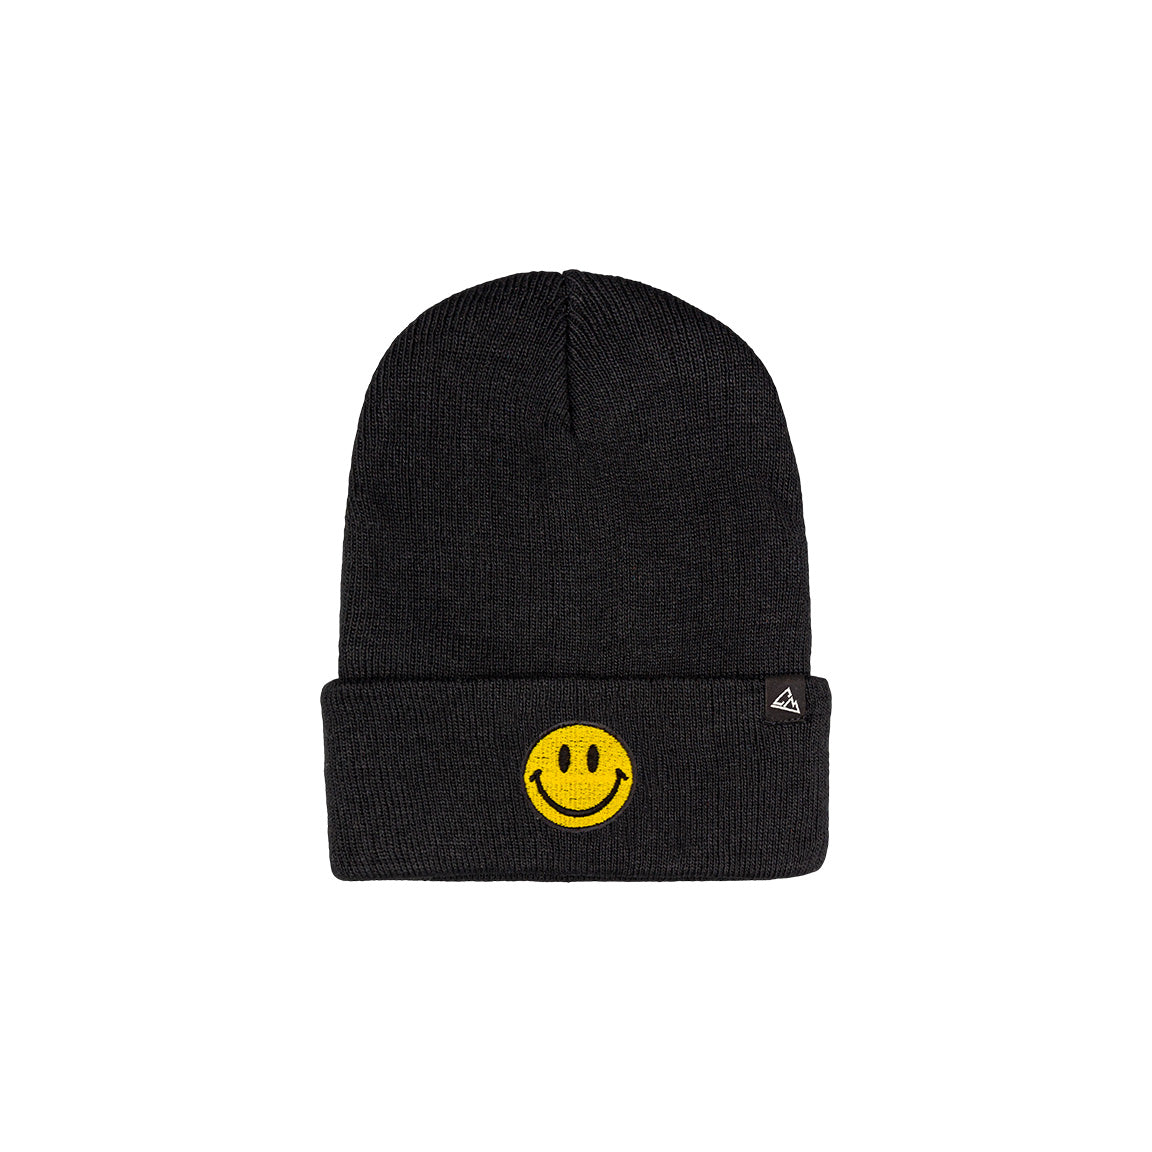 A black ribbed beanie is adorned with a yellow smiley face patch on the fold, complemented by a small triangular logo.